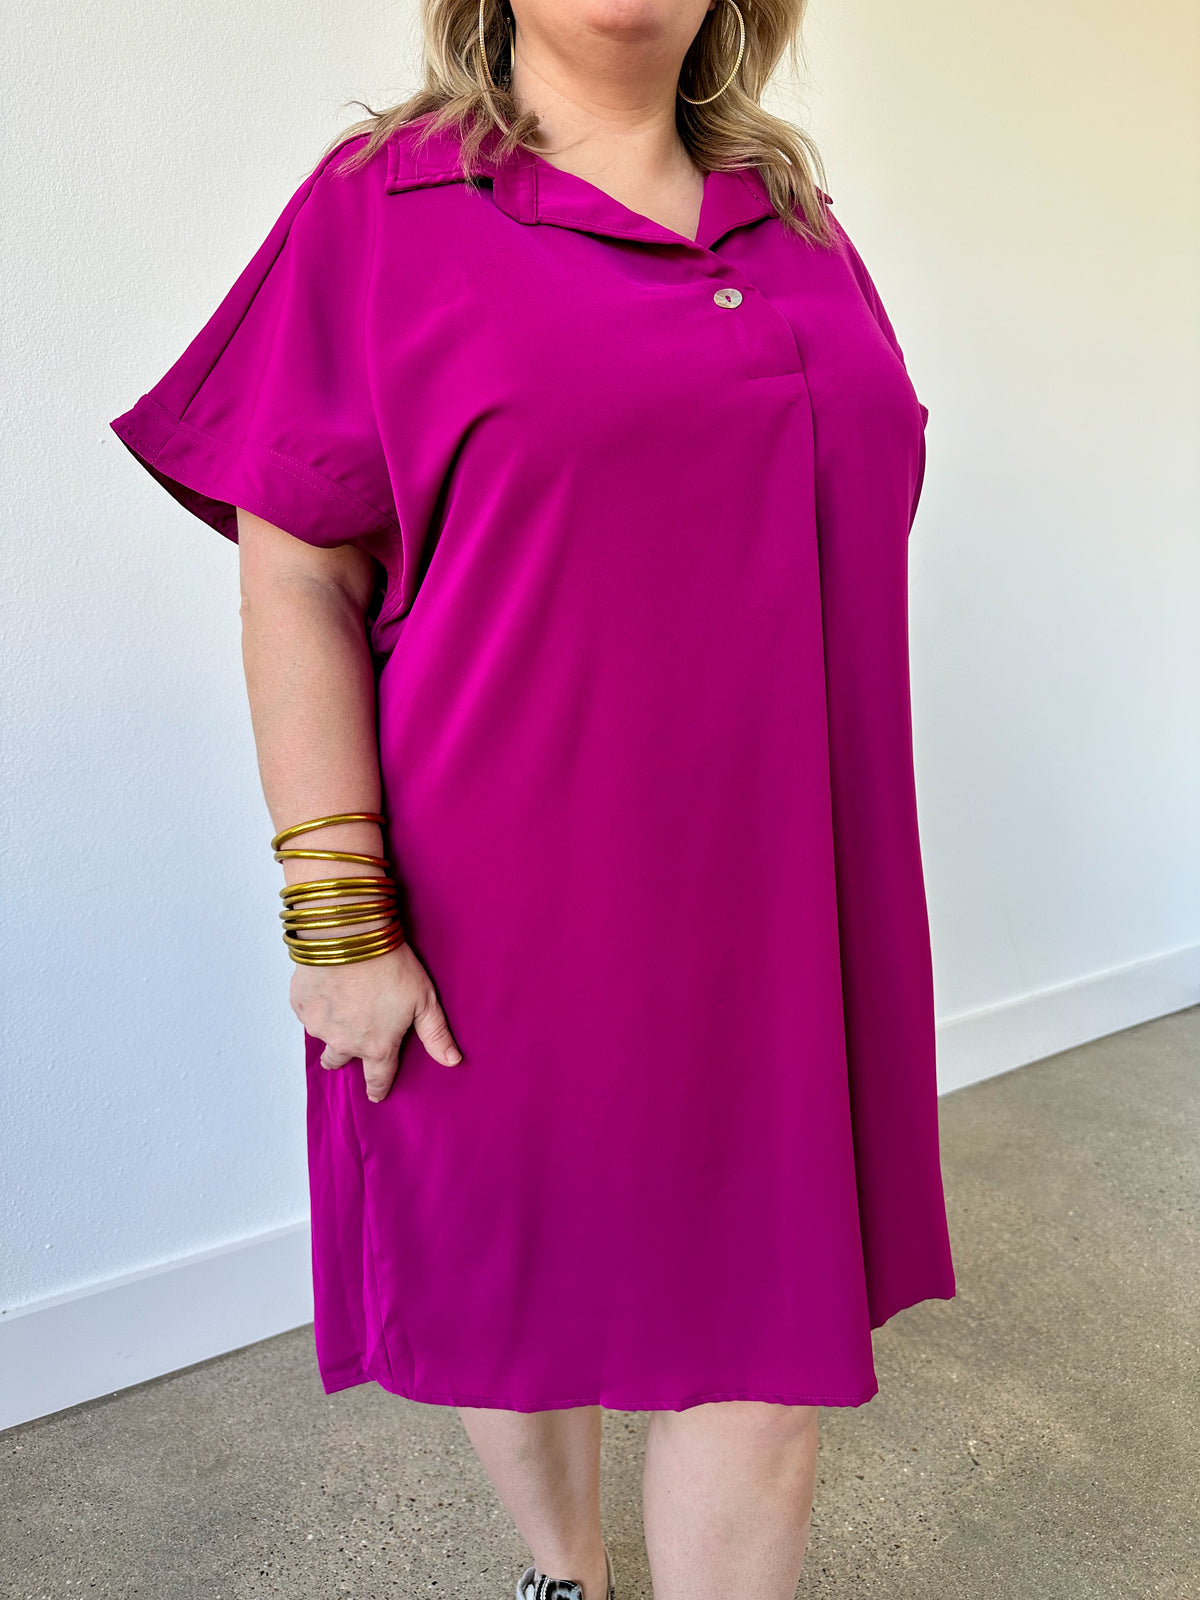 magenta pink plus size dress with top buttons and collar